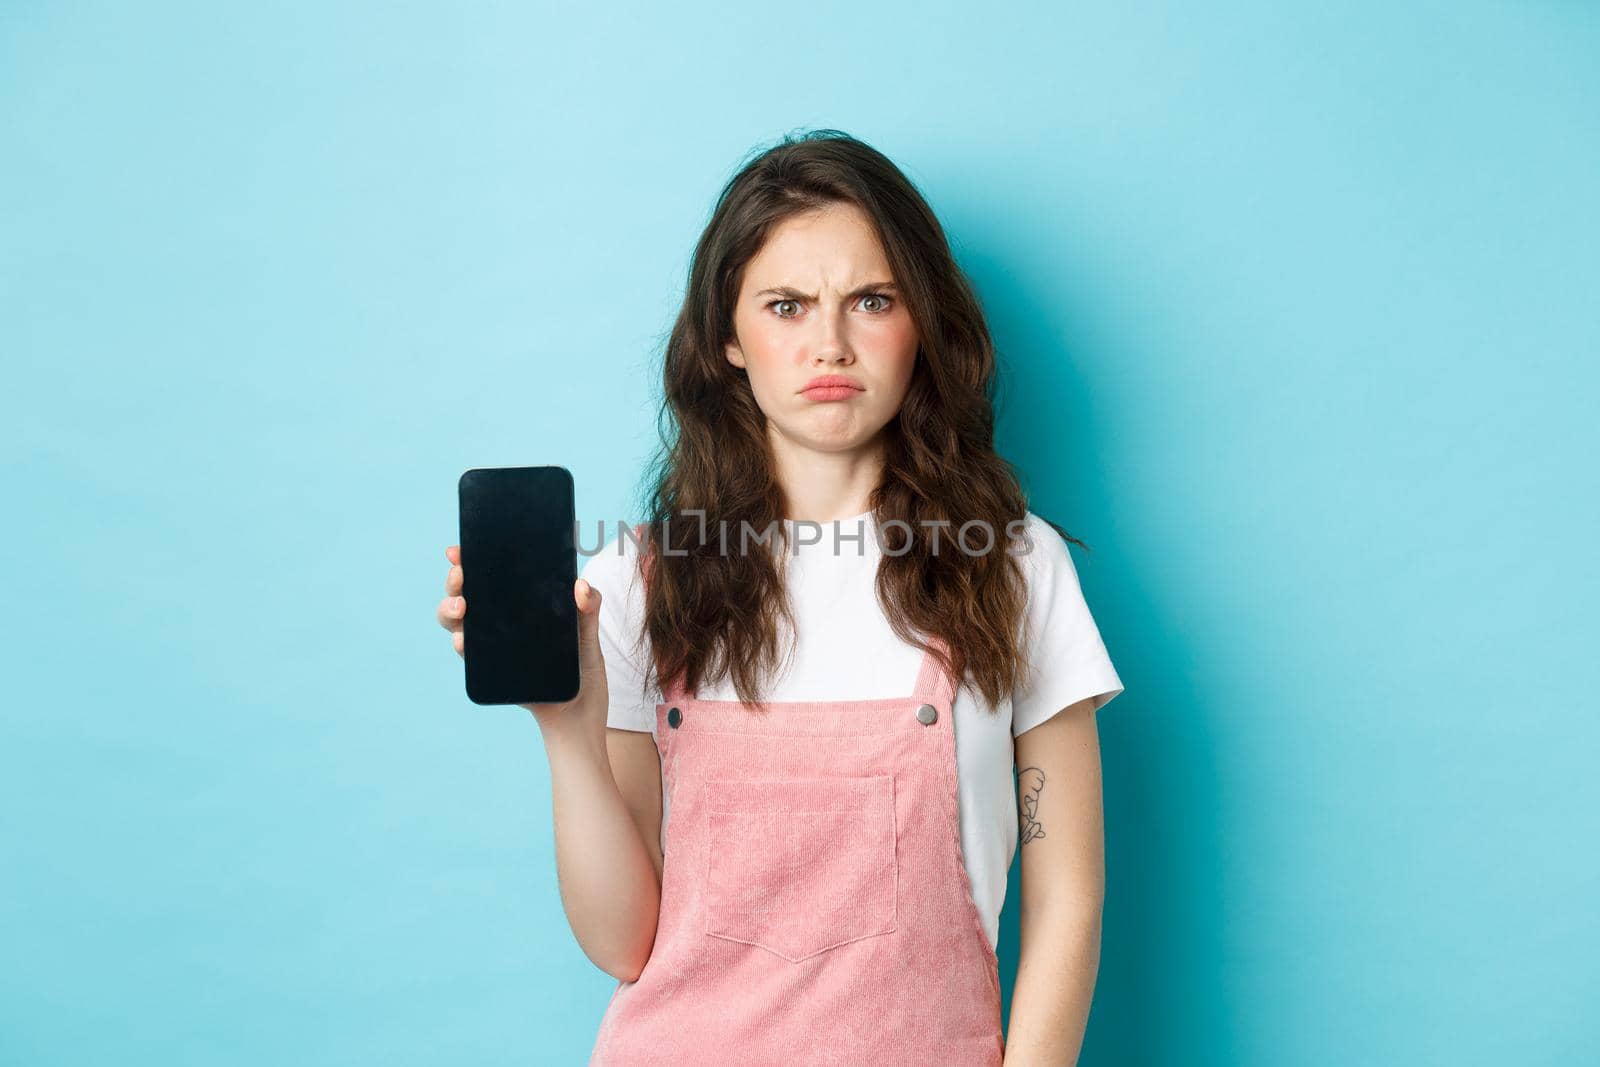 Disappointed girl frowning while showing empty smartphone screen, look displeased or angry, standing against blue background.